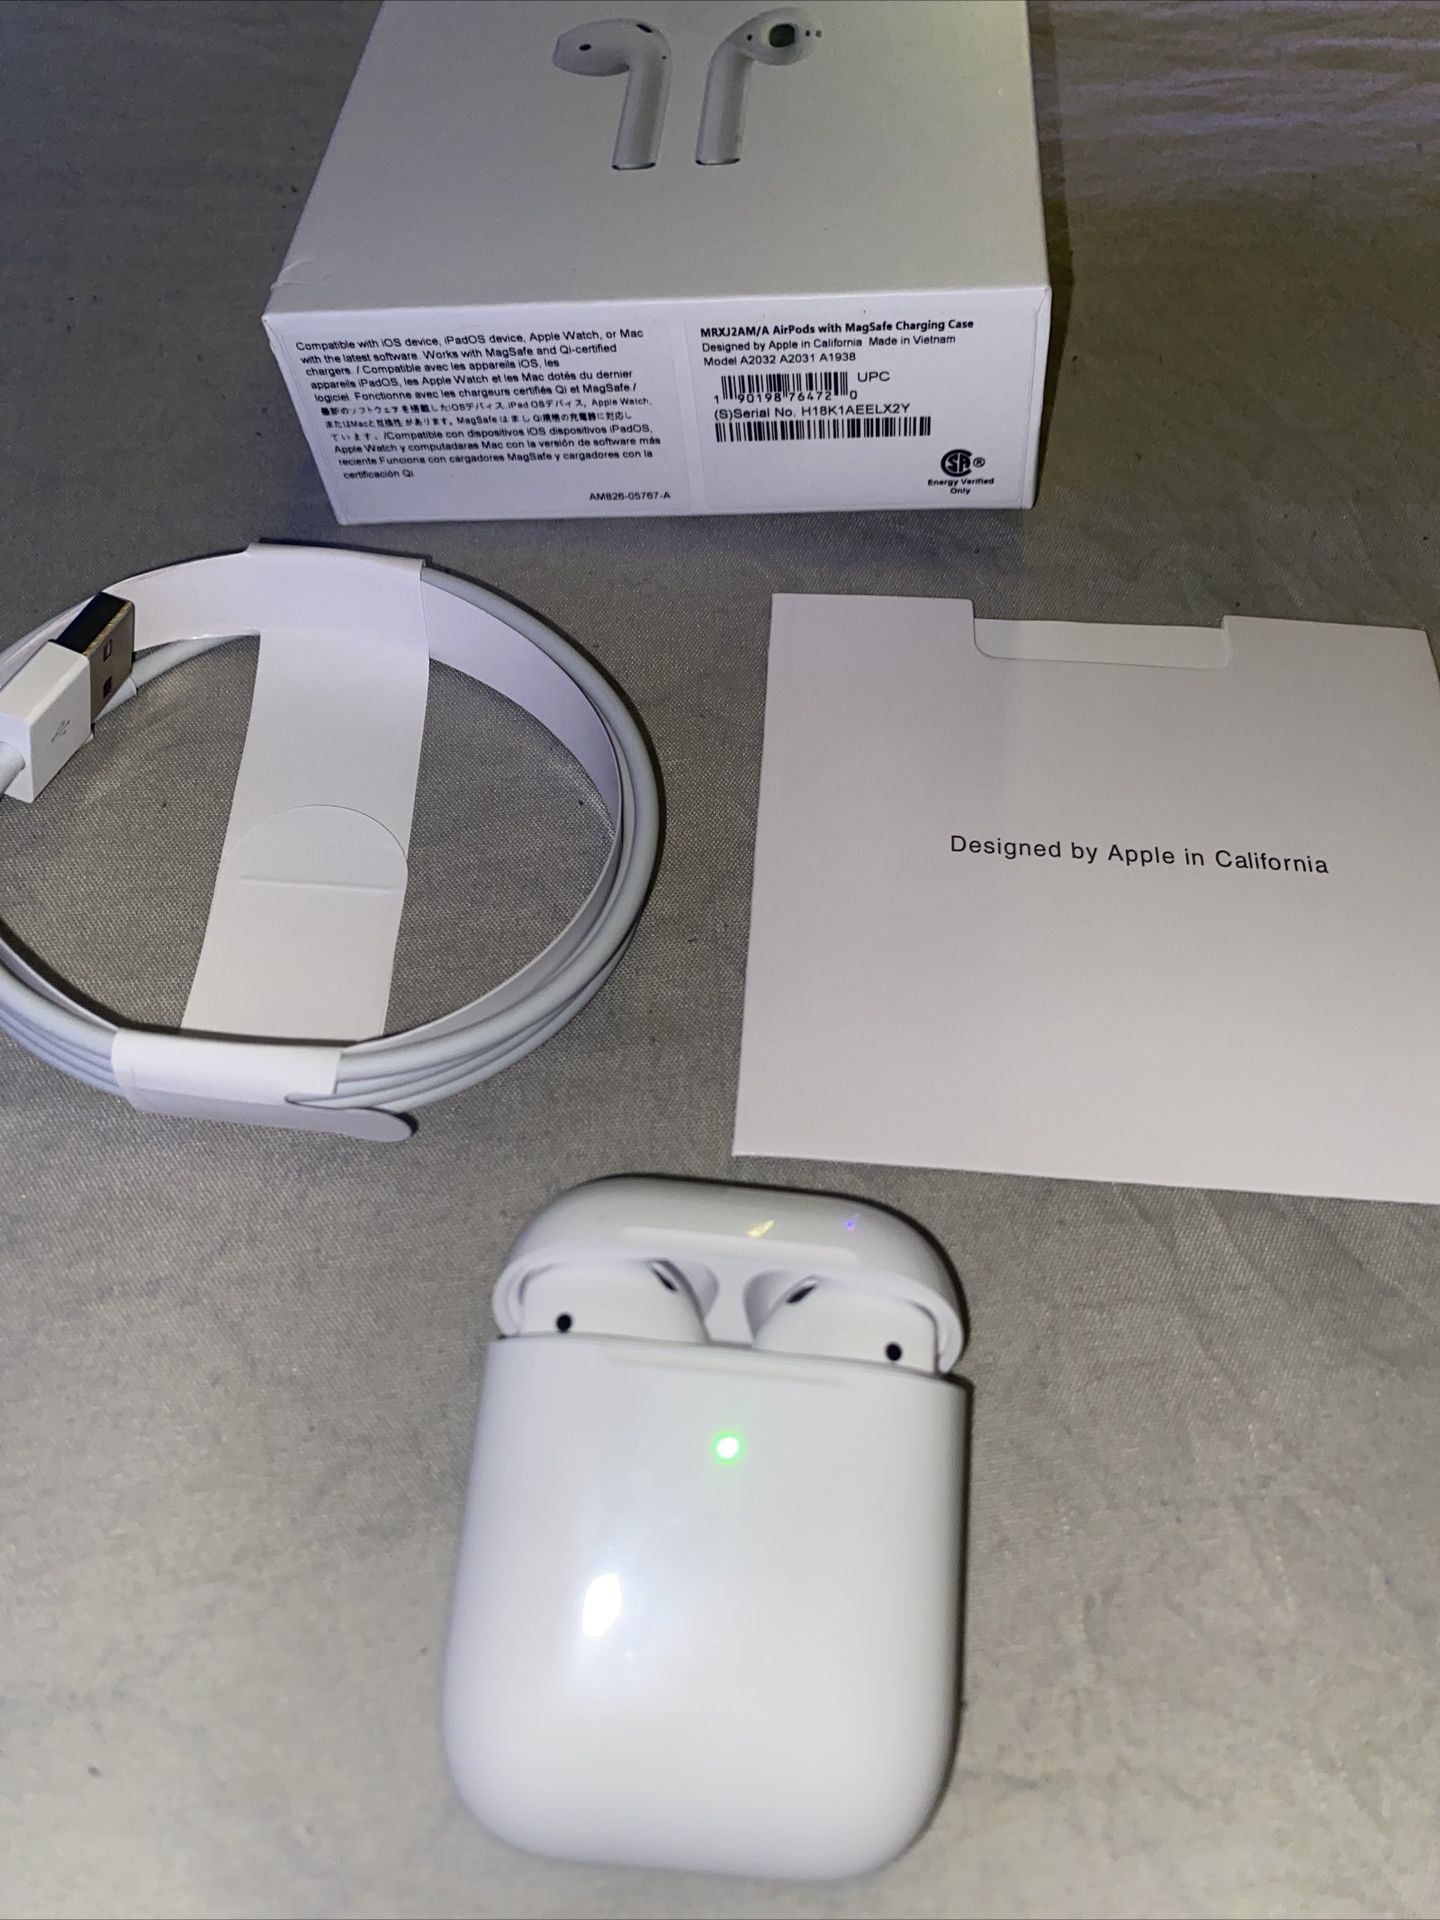 *NEW* Apple AirPods 2nd Generation With Lighting Charging Case - In White 